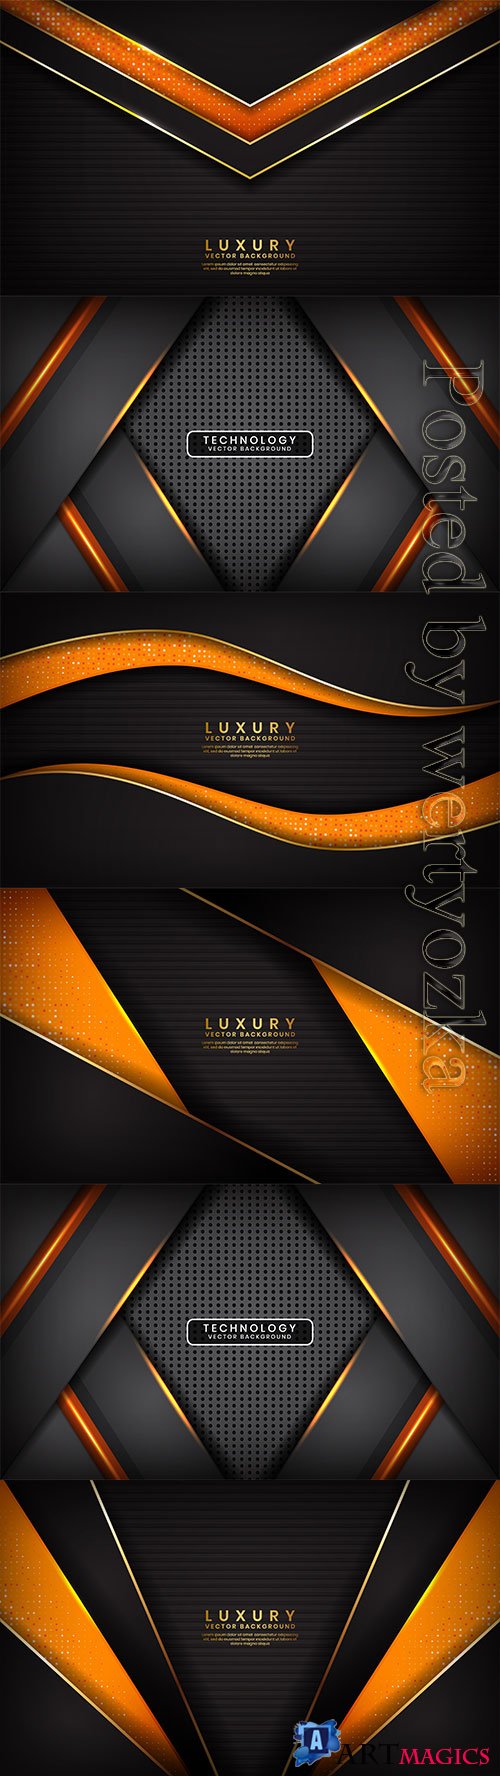 Abstract vector backgrounds with orange designs